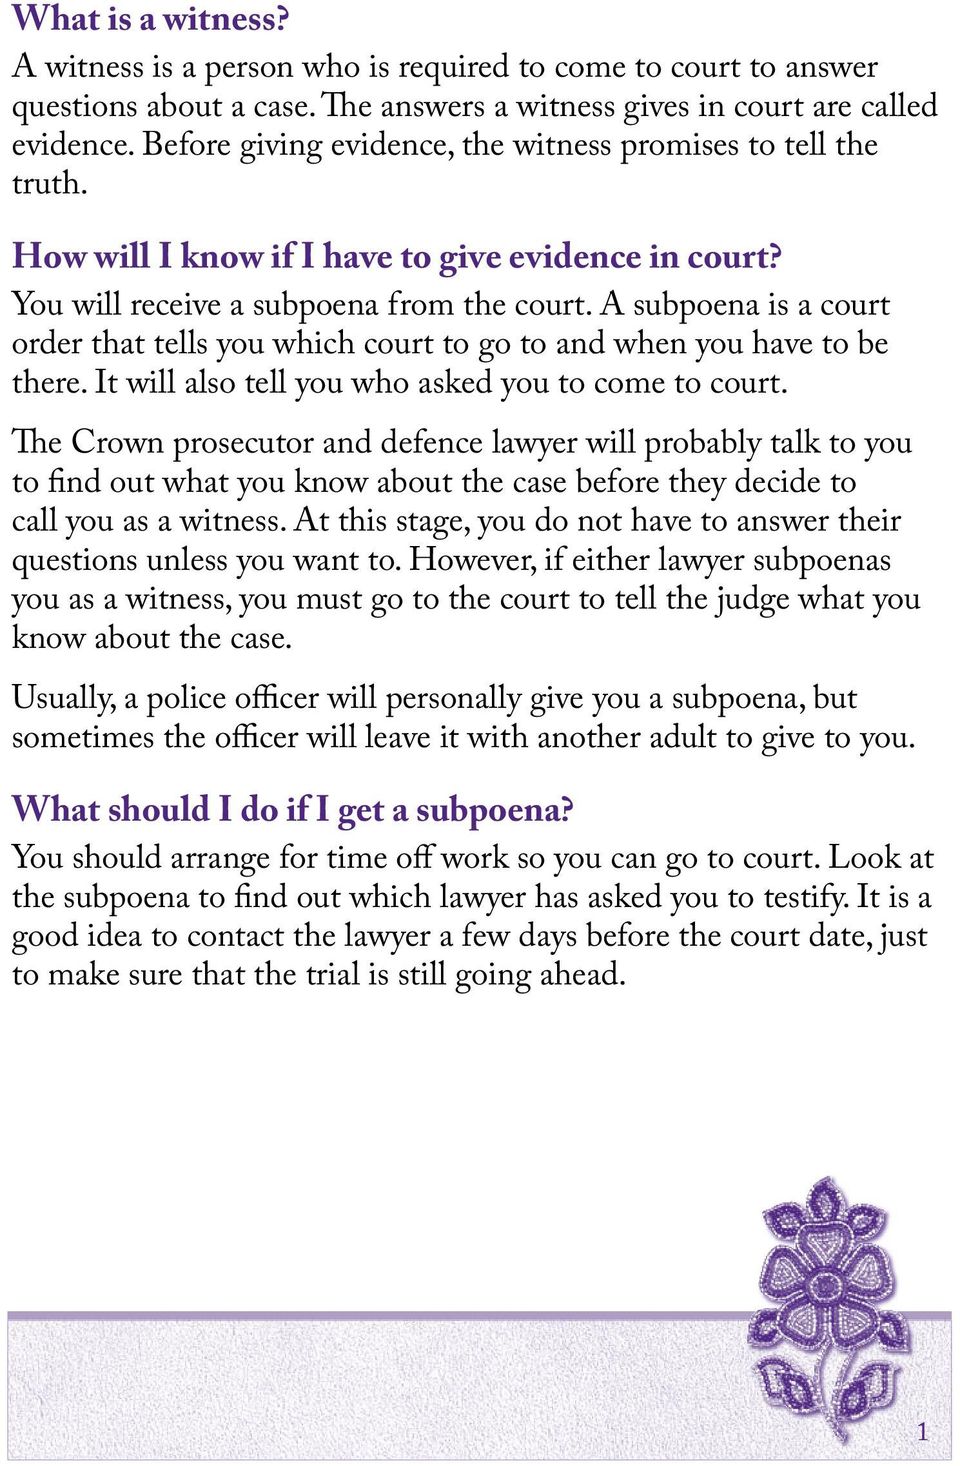 A subpoena is a court order that tells you which court to go to and when you have to be there. It will also tell you who asked you to come to court.